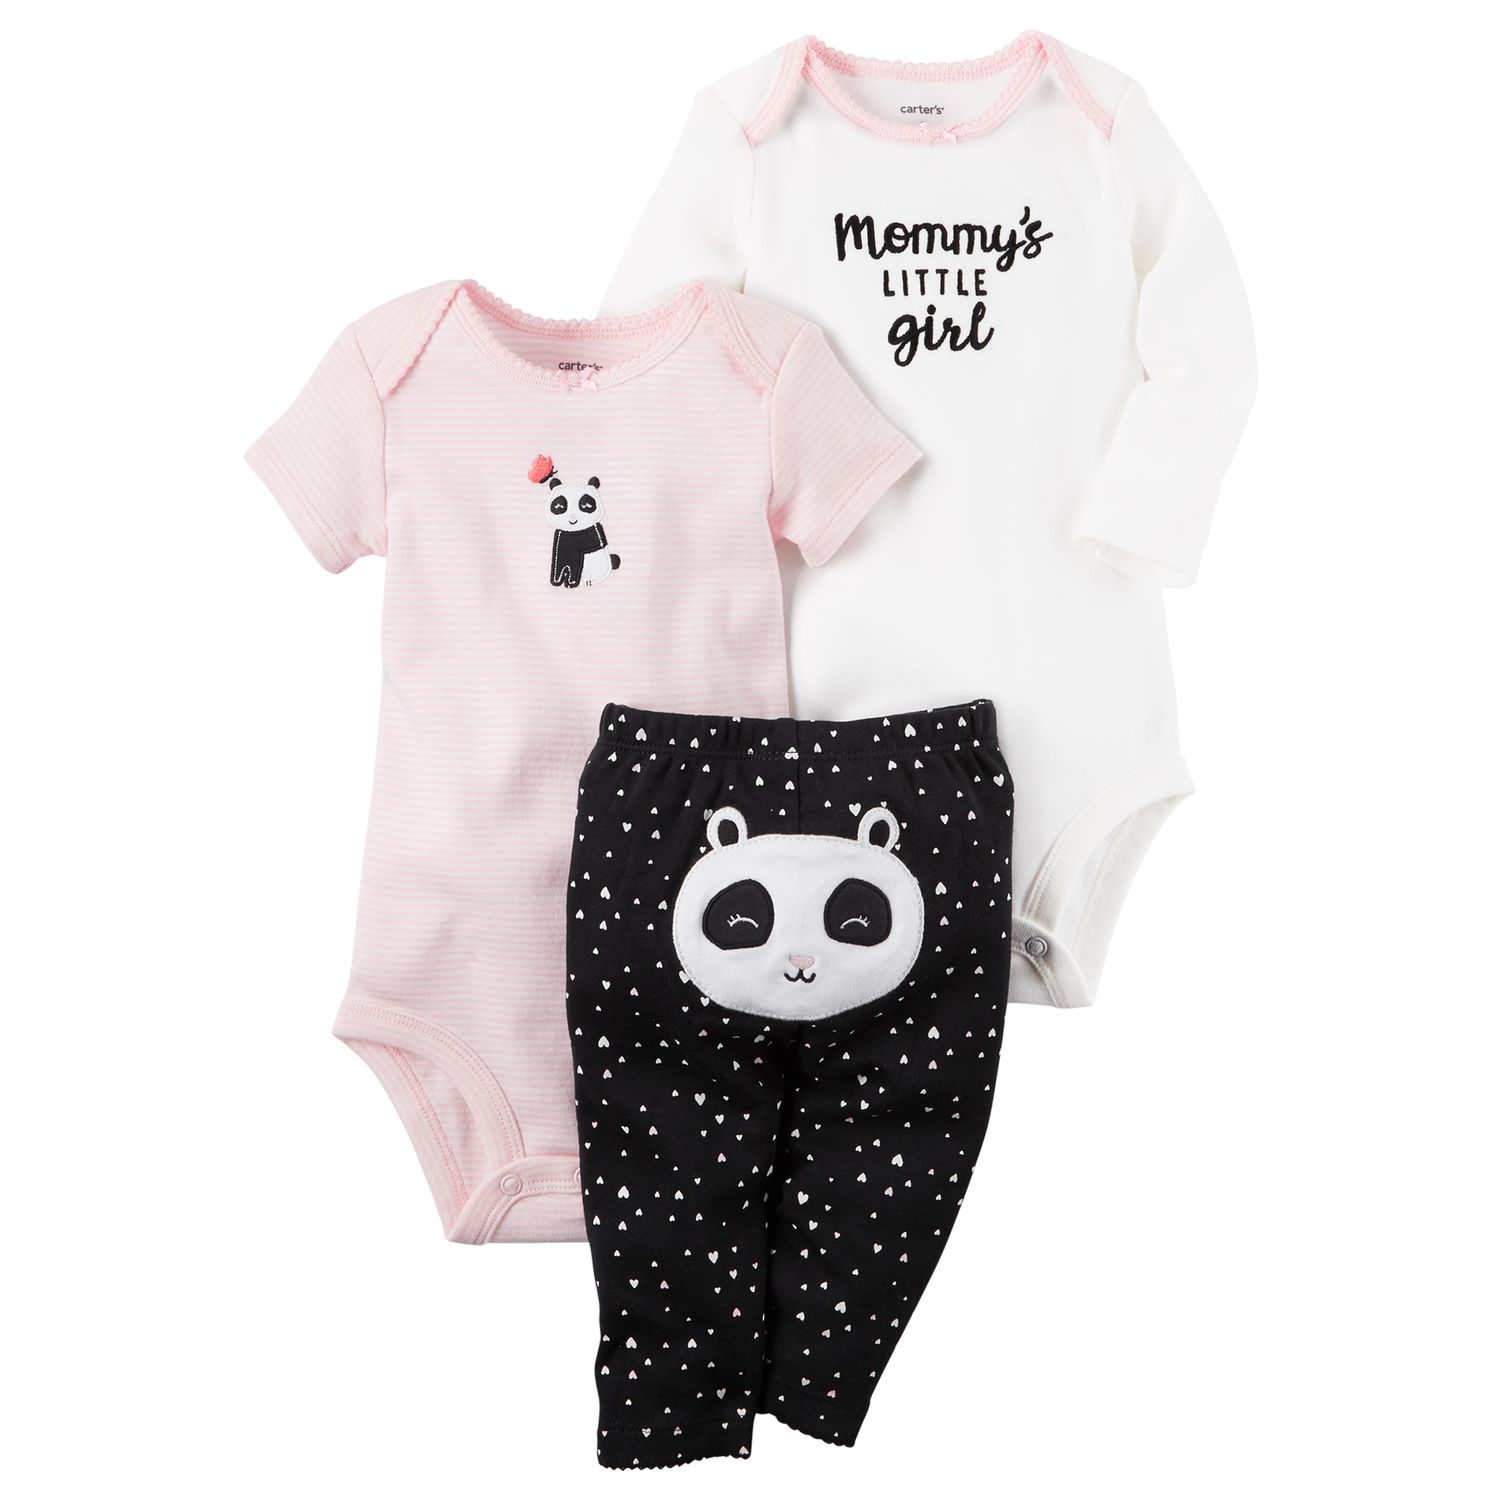 mommy's little girl baby clothes